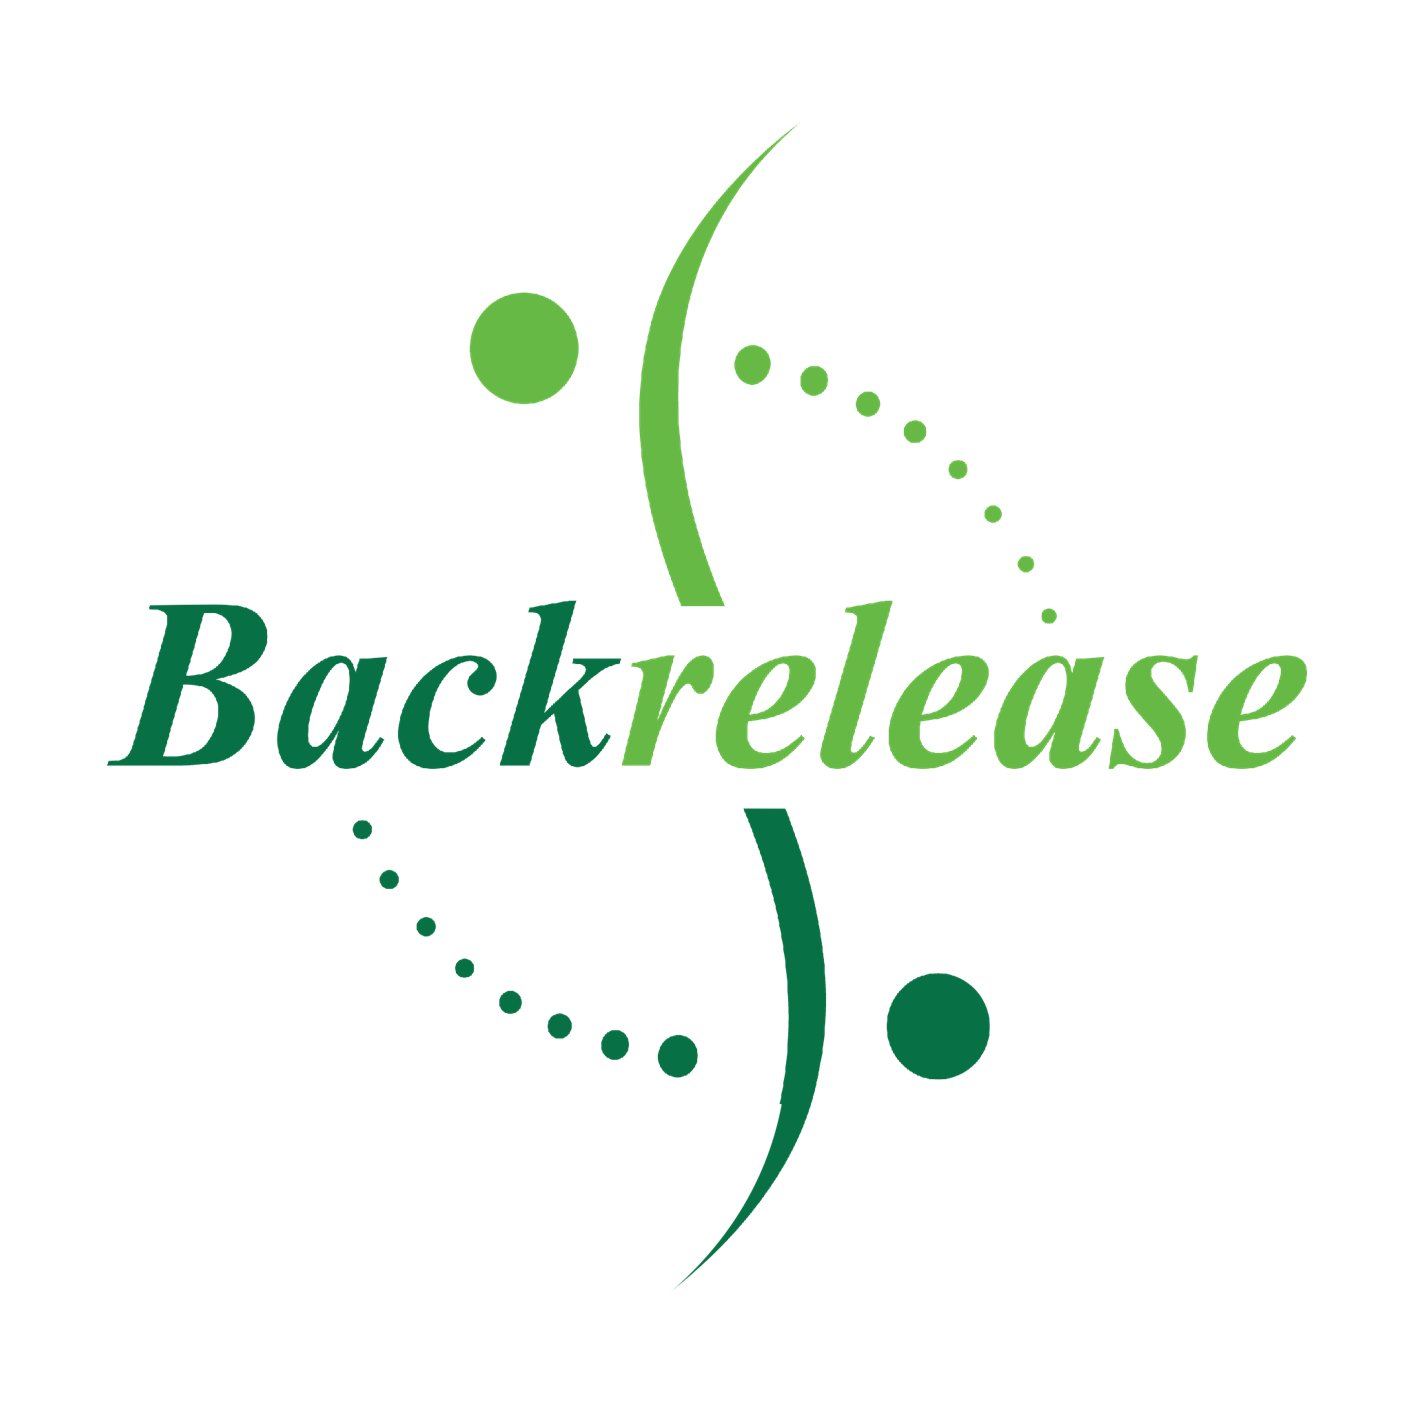 Backrelease is a compact & multifunction self massage device for body & backpain.